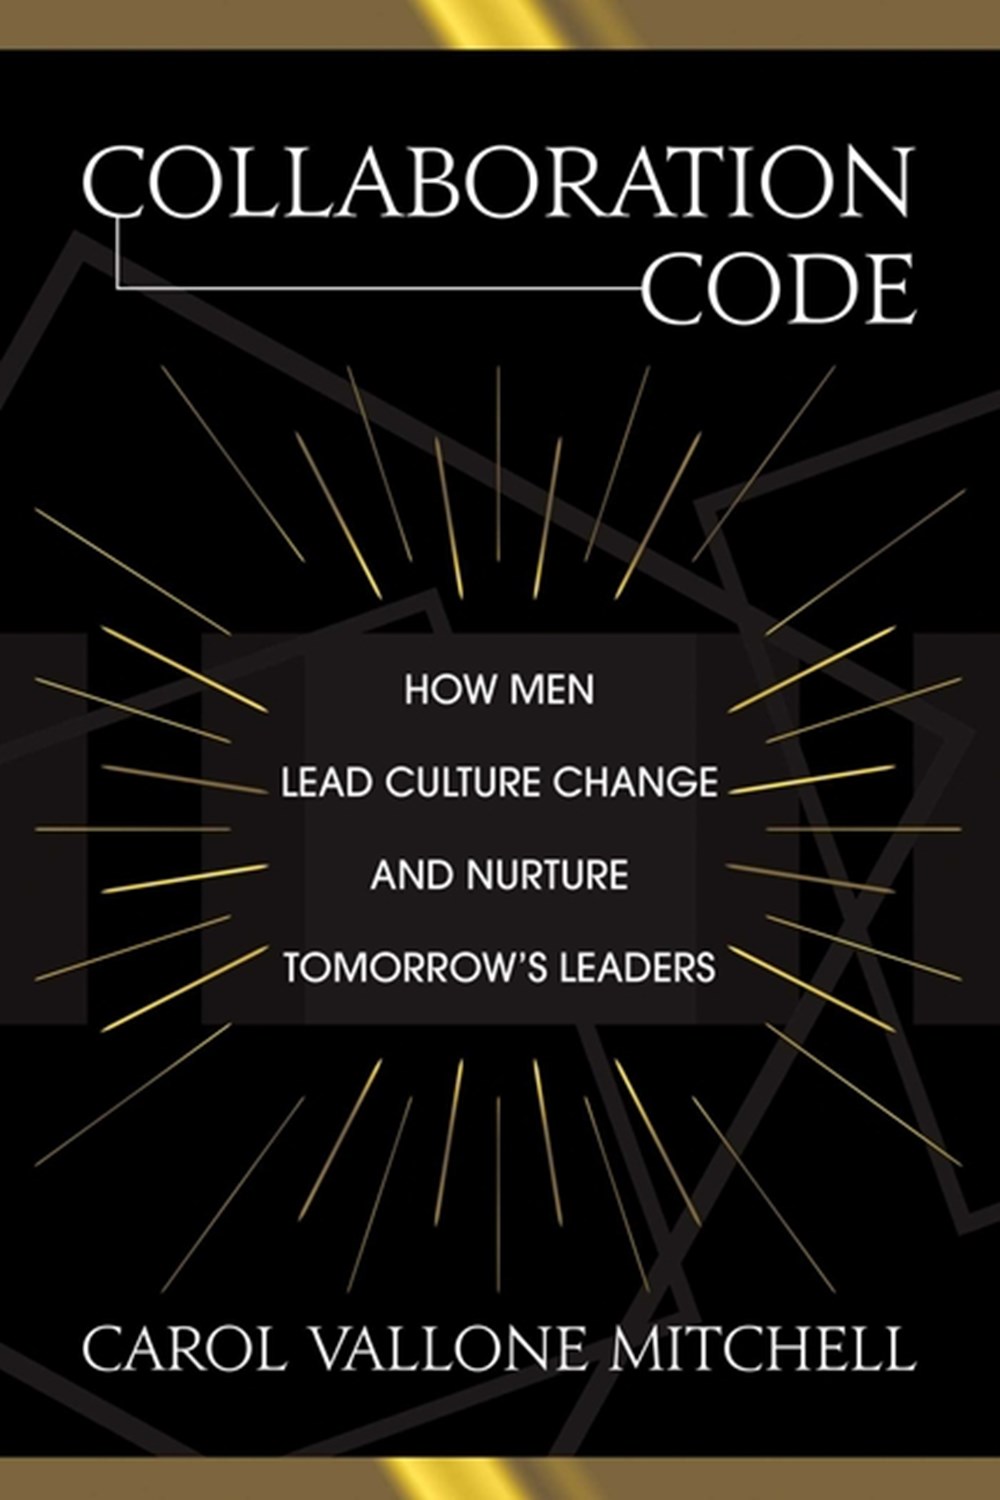 Collaboration Code How Men Lead Culture Change and Nurture Tomorrow's Leaders